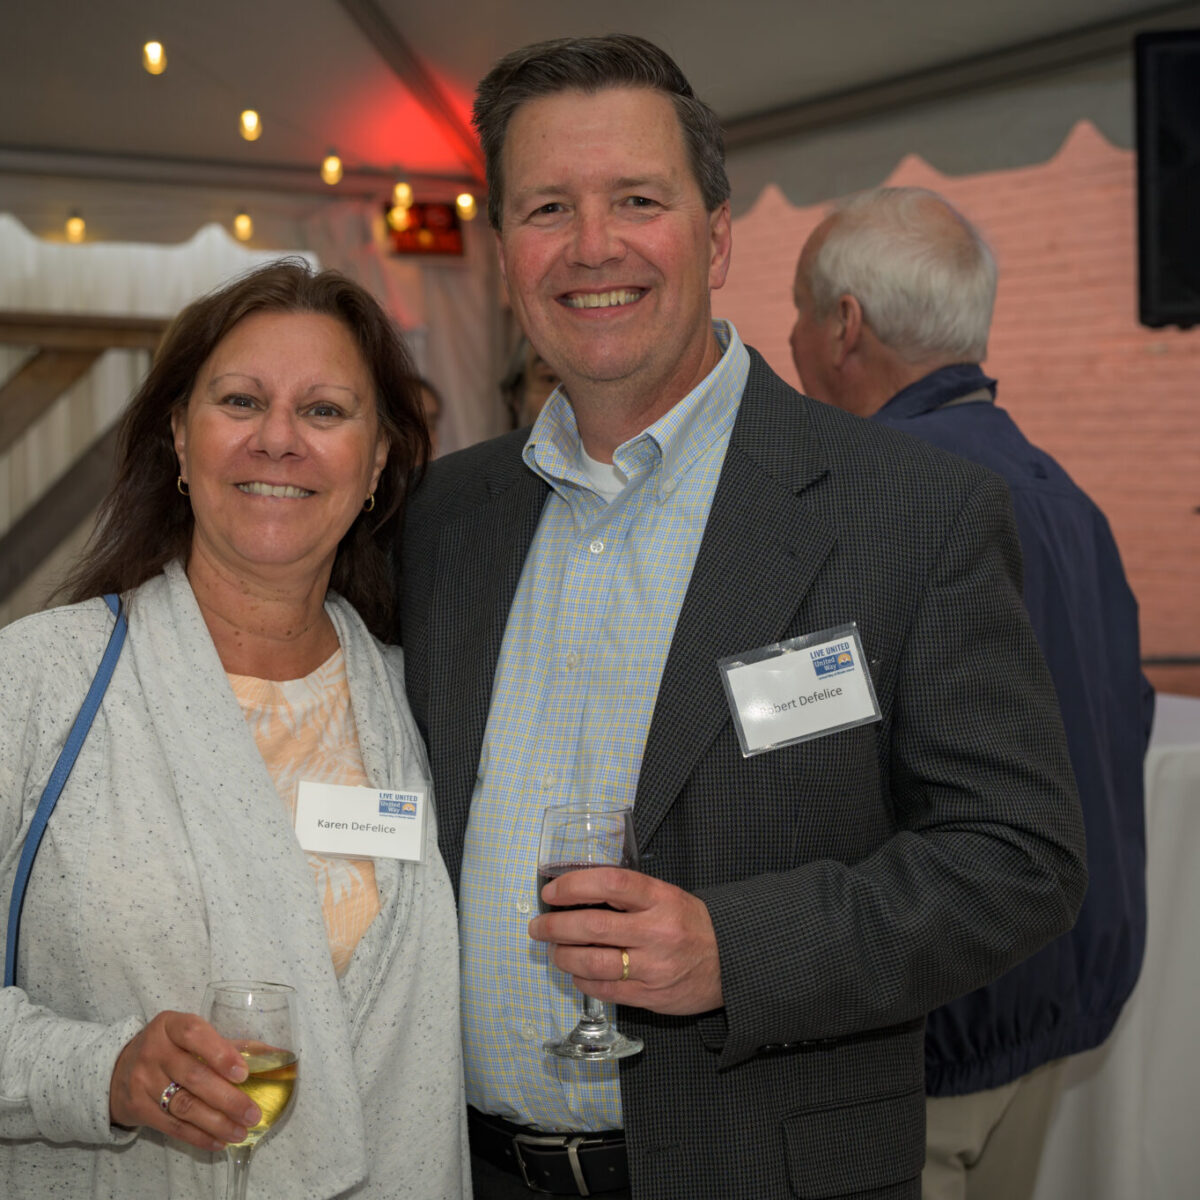 Karen and Robert DeFelice, supporters of United Way of Rhode Island, pose for a photo.